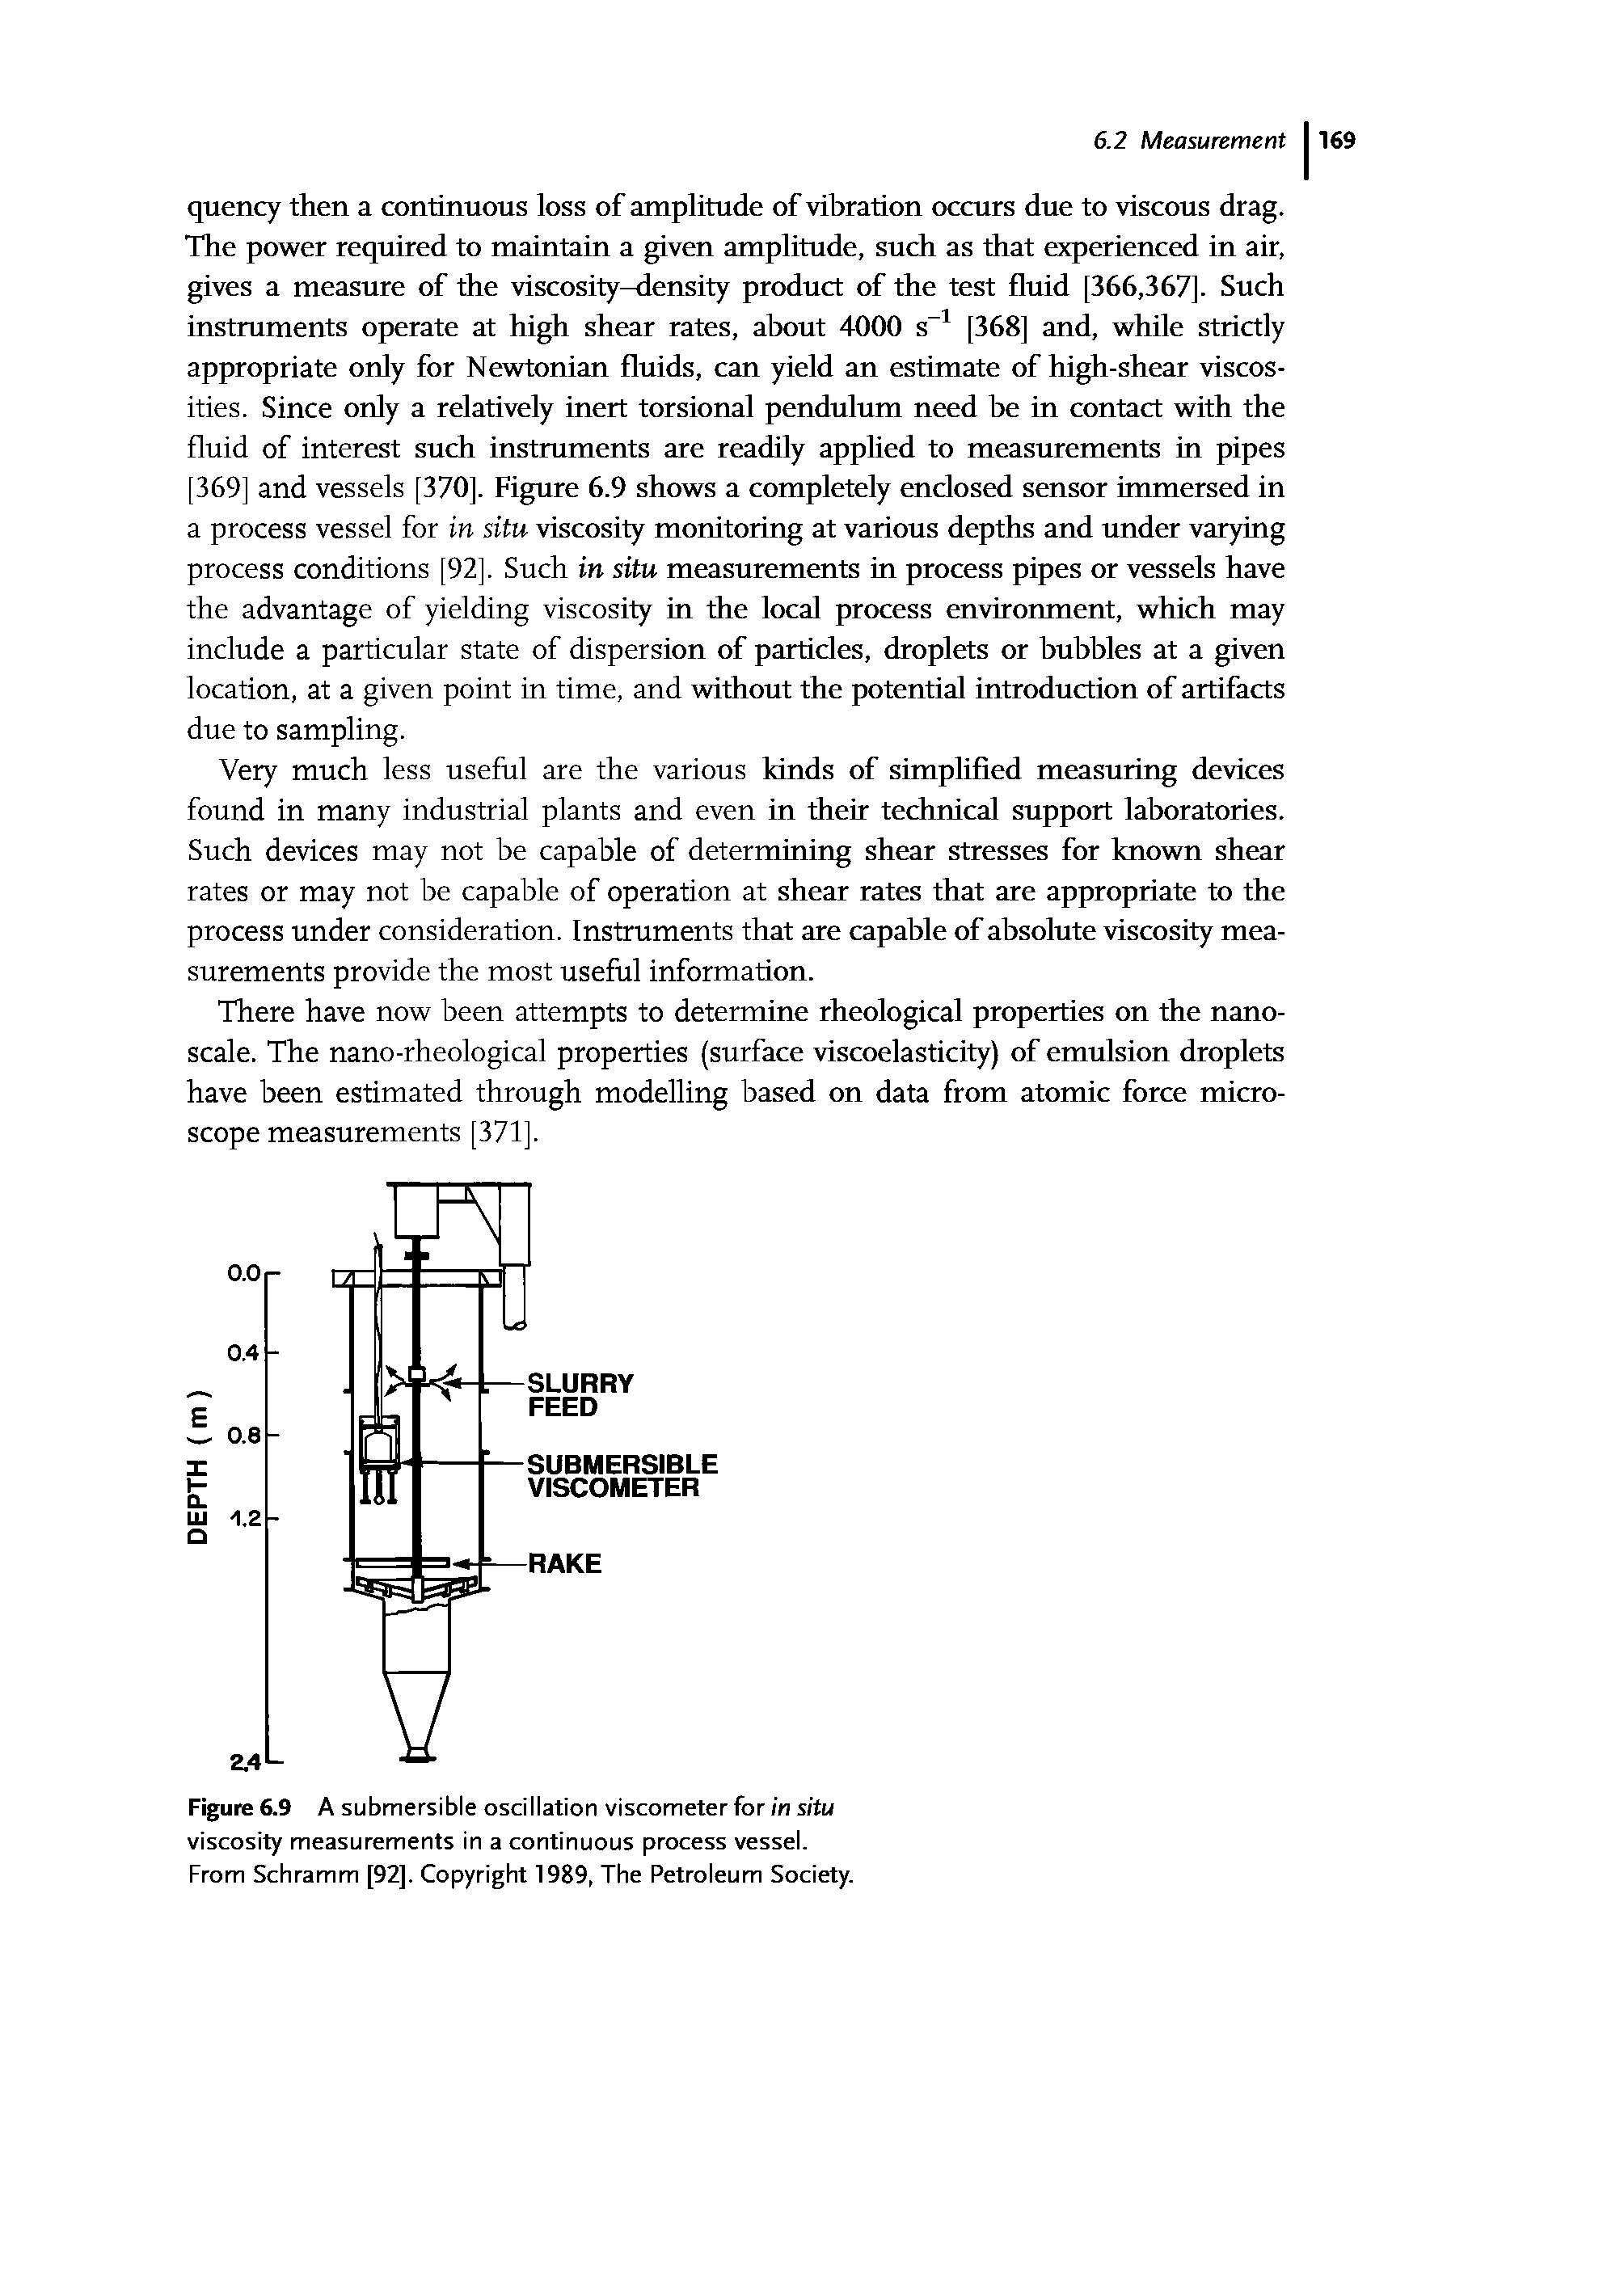 Figure 6.9 A submersible oscillation viscometer for in situ viscosity measurements in a continuous process vessel. From Schramm [92]. Copyright 1989, The Petroleum Society.